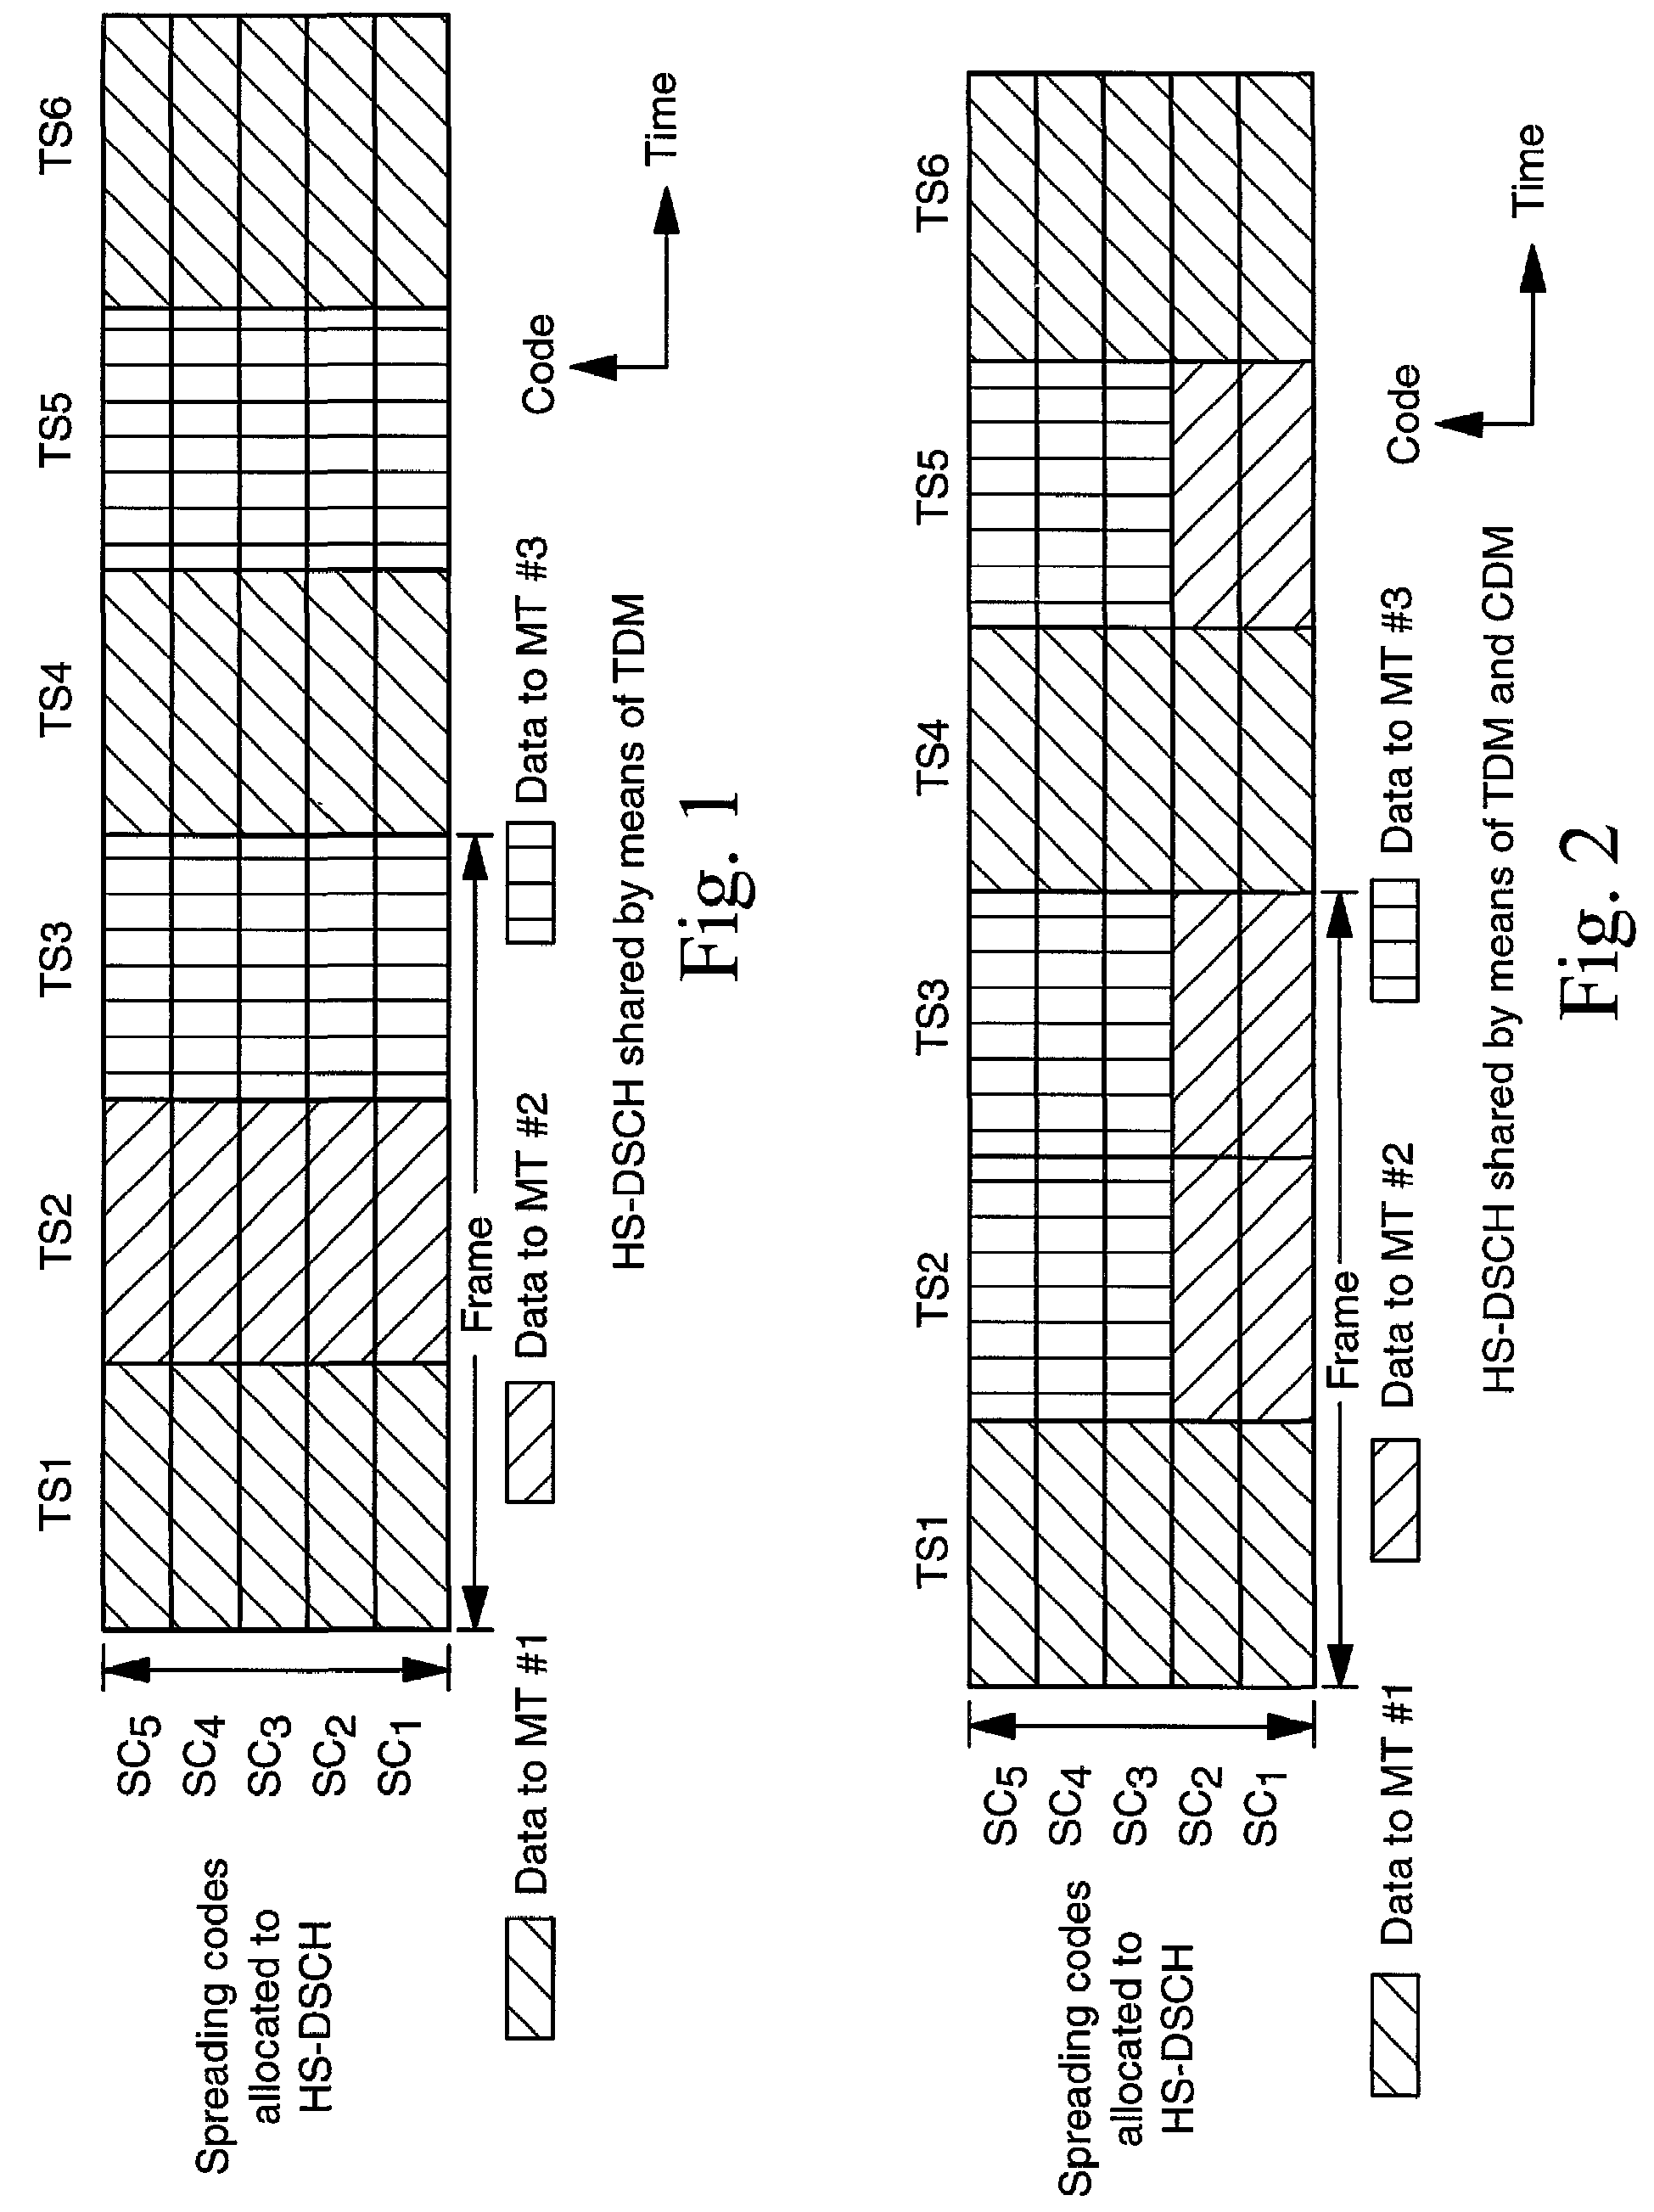 Cellular radio communication system with frequency reuse